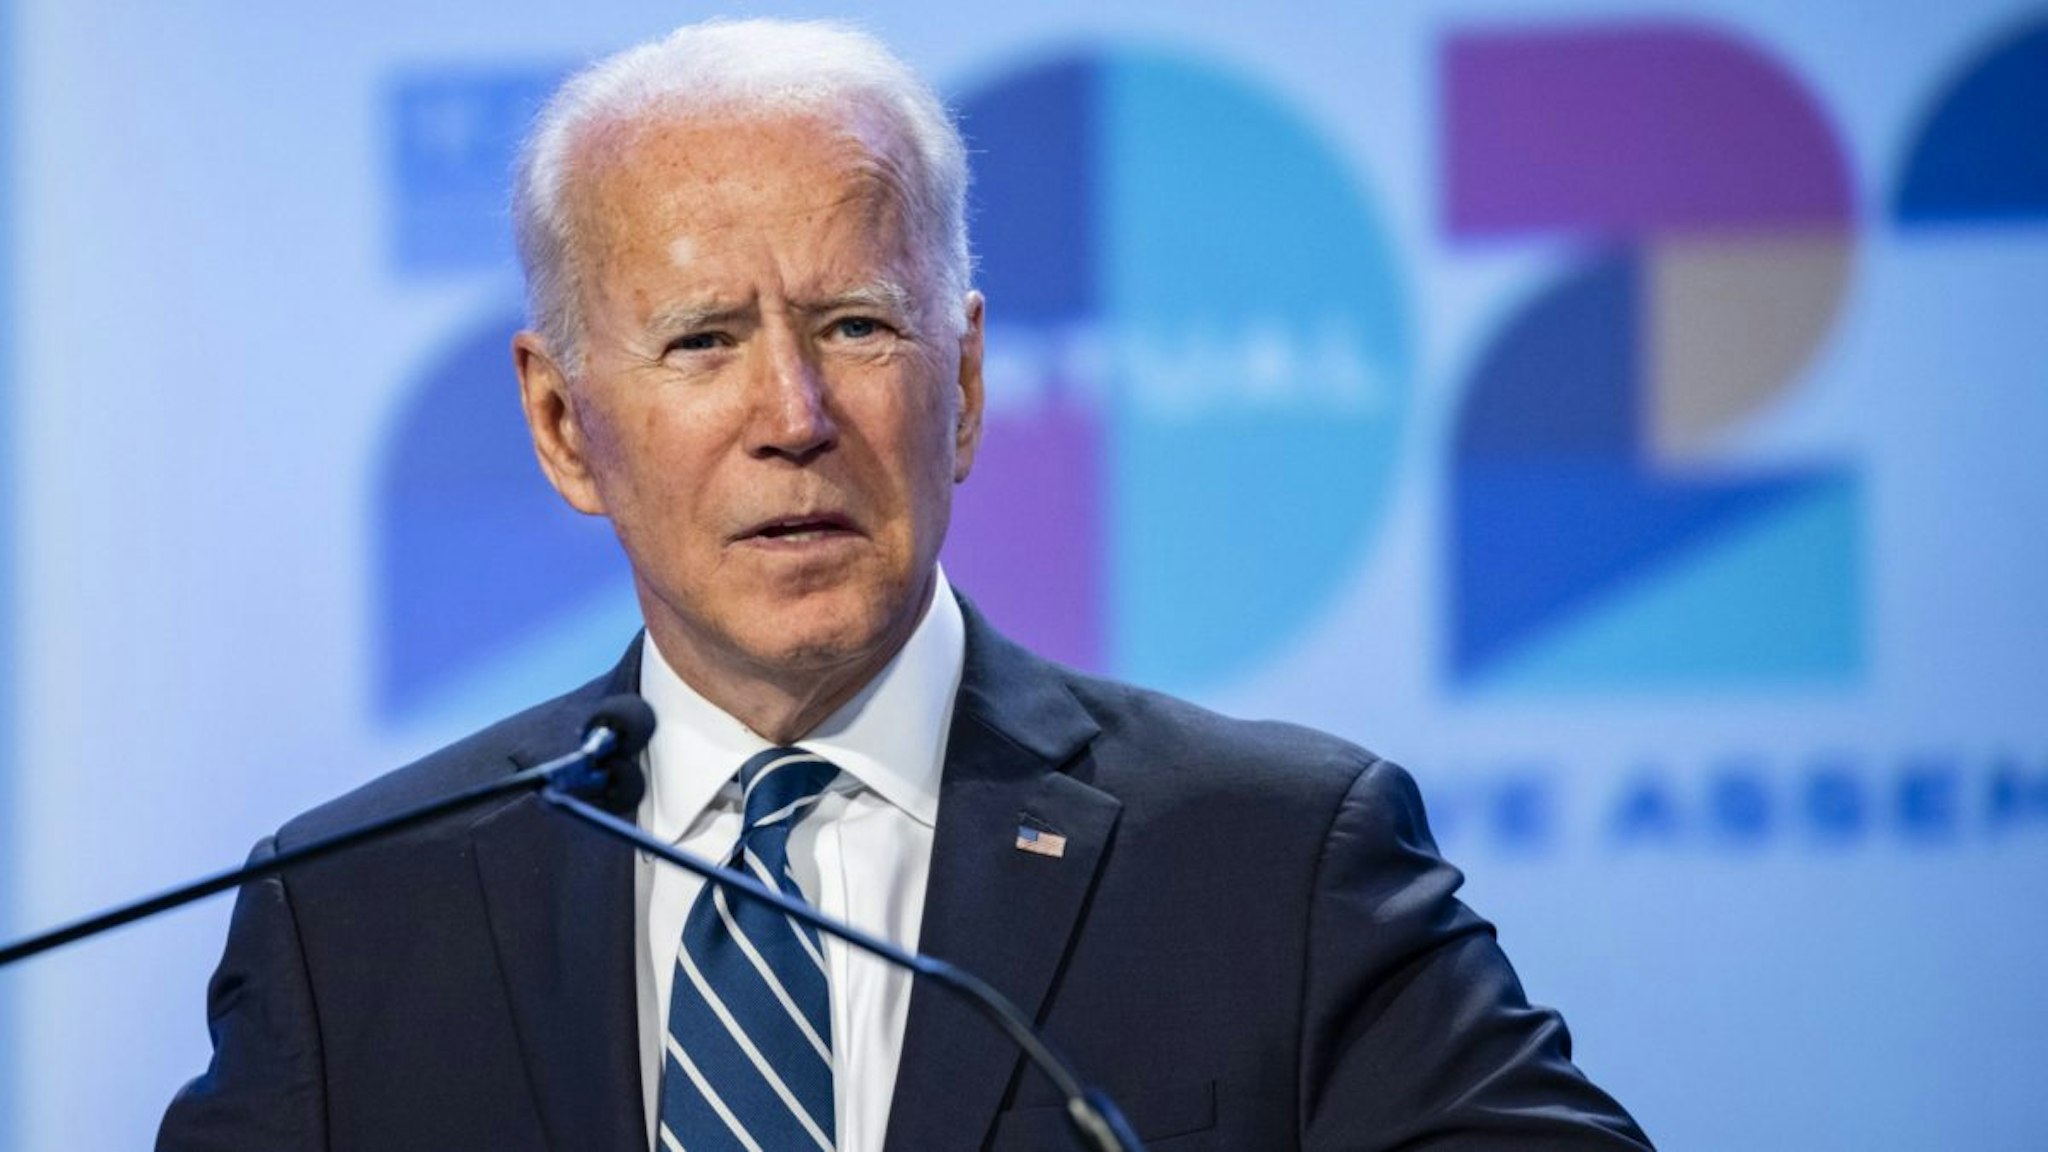 U.S. President Joe Biden speaks during the National Education Association's annual meeting and representative assembly event in Washington, D.C., U.S., on Friday, July 2, 2021.